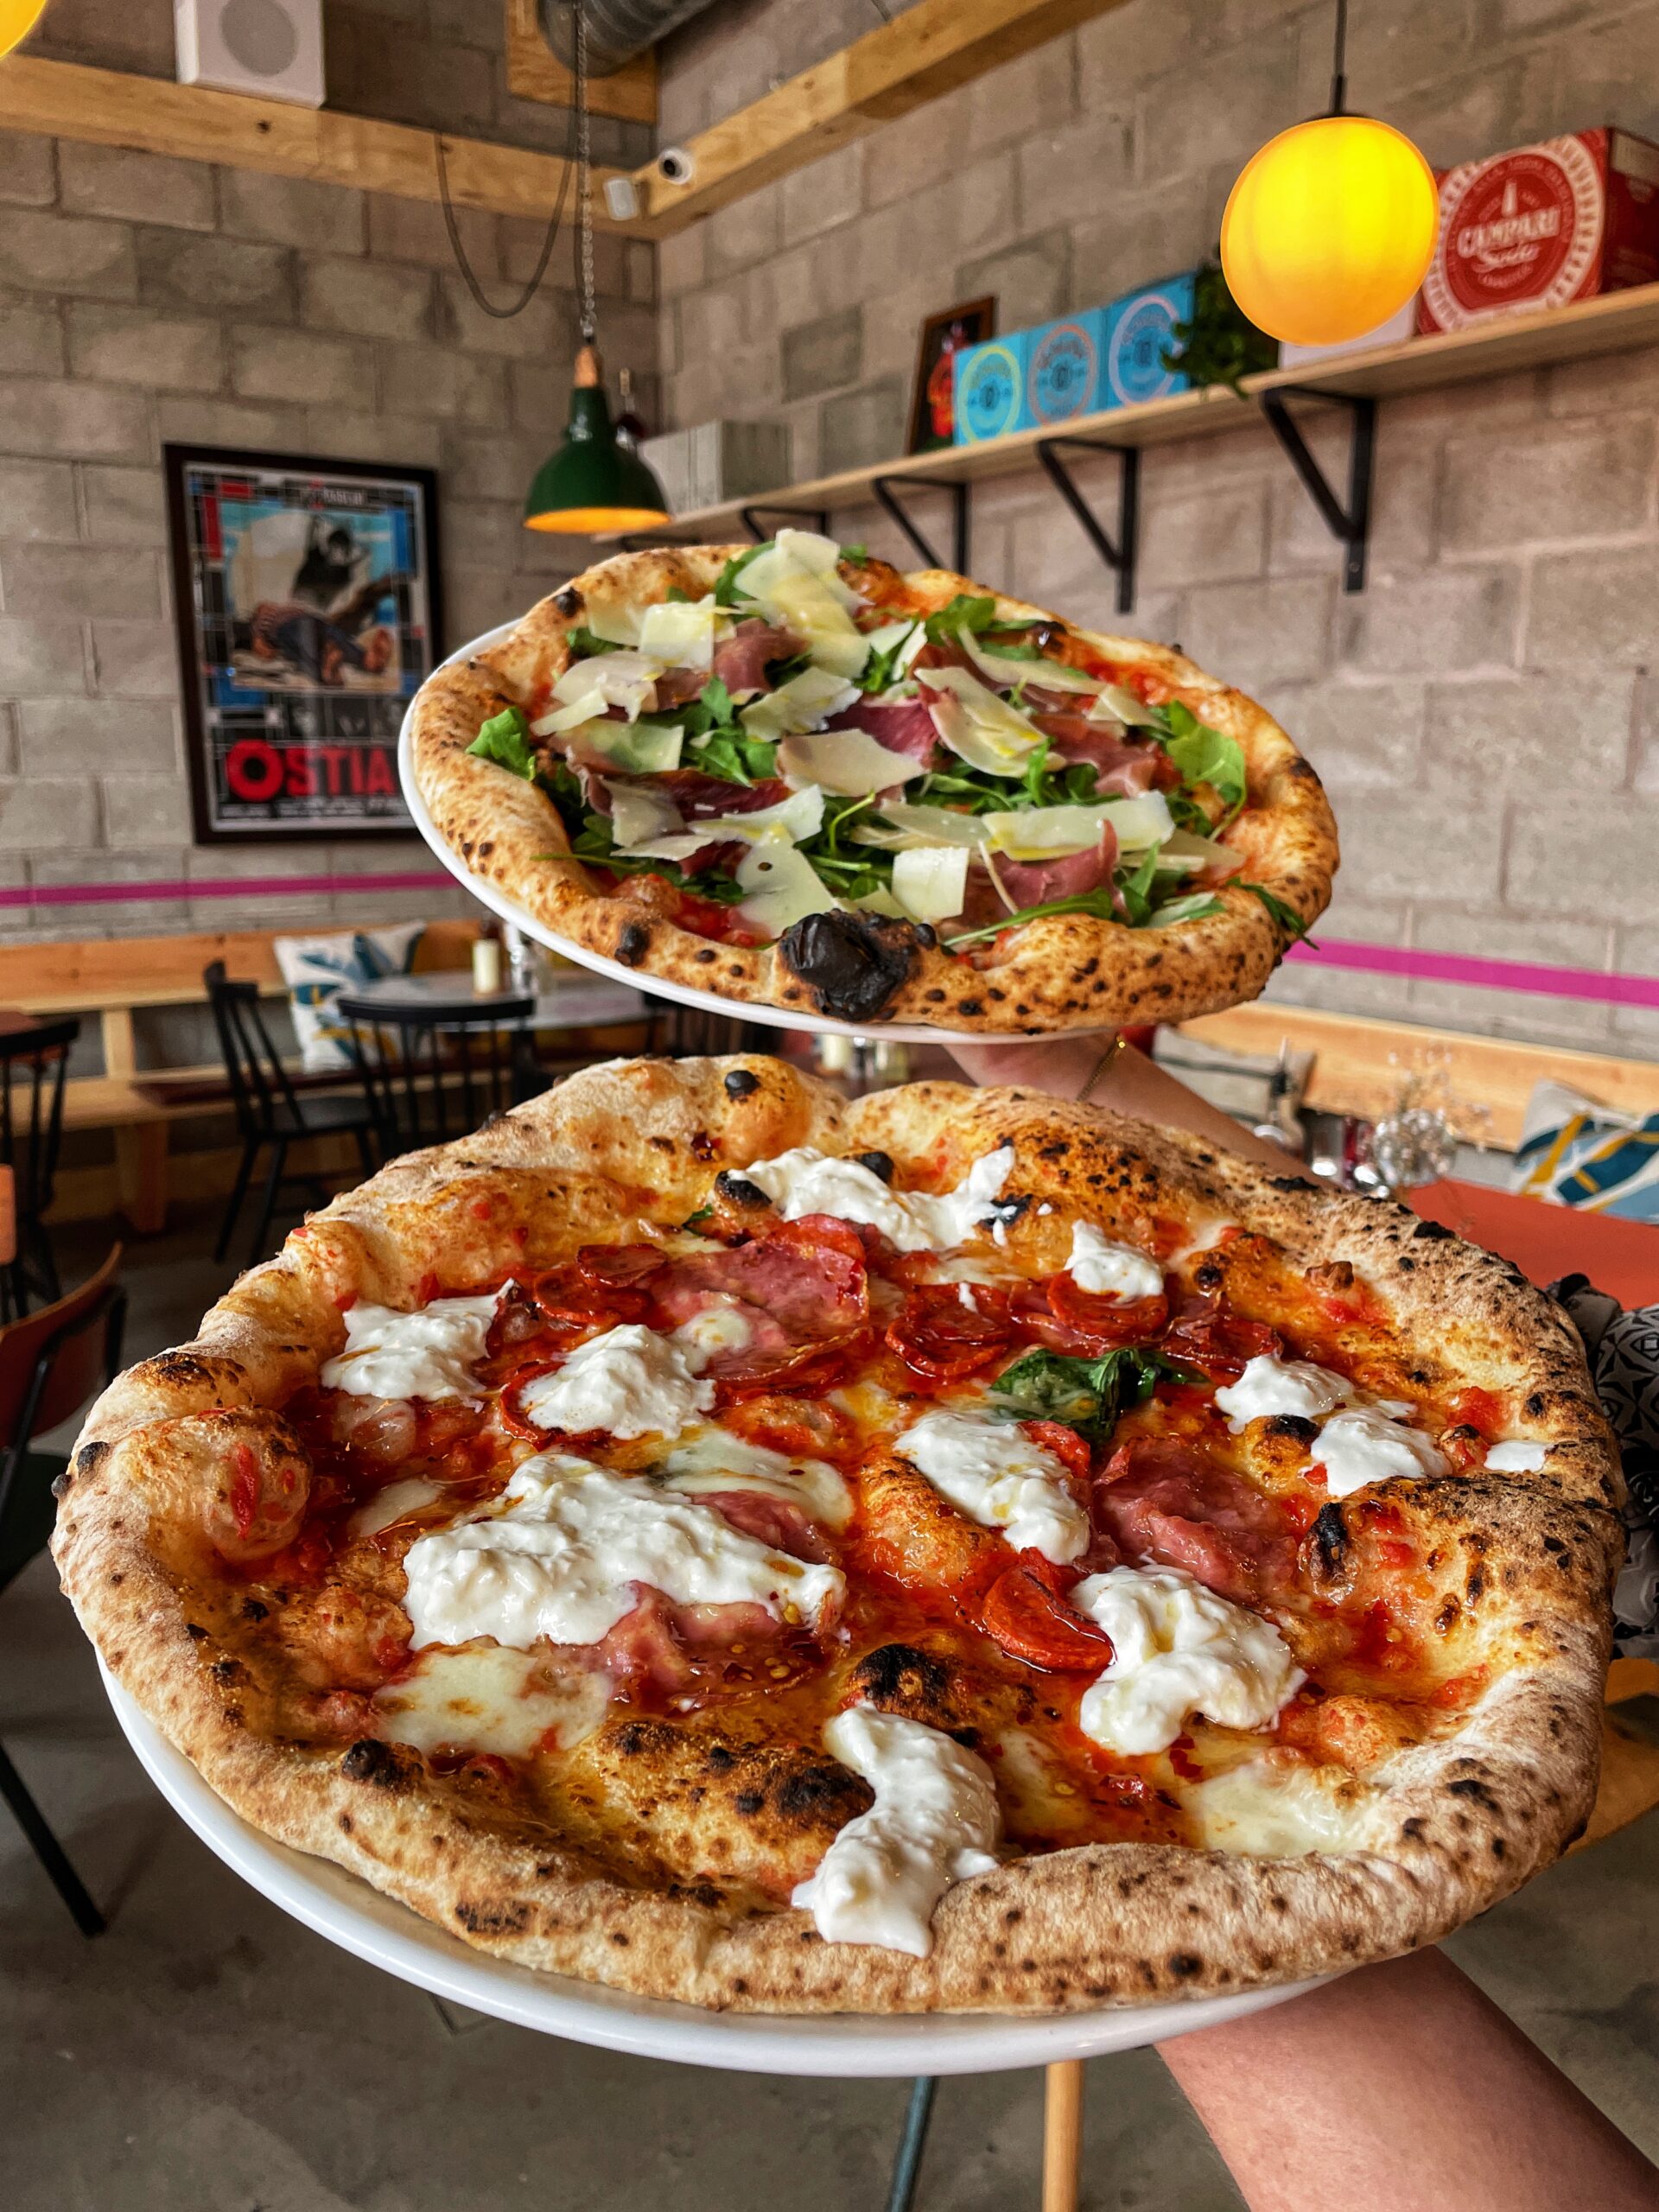 Rudy's in Altrincham is serving up classic Neapolitan pizzas. Credit: The Manc Group